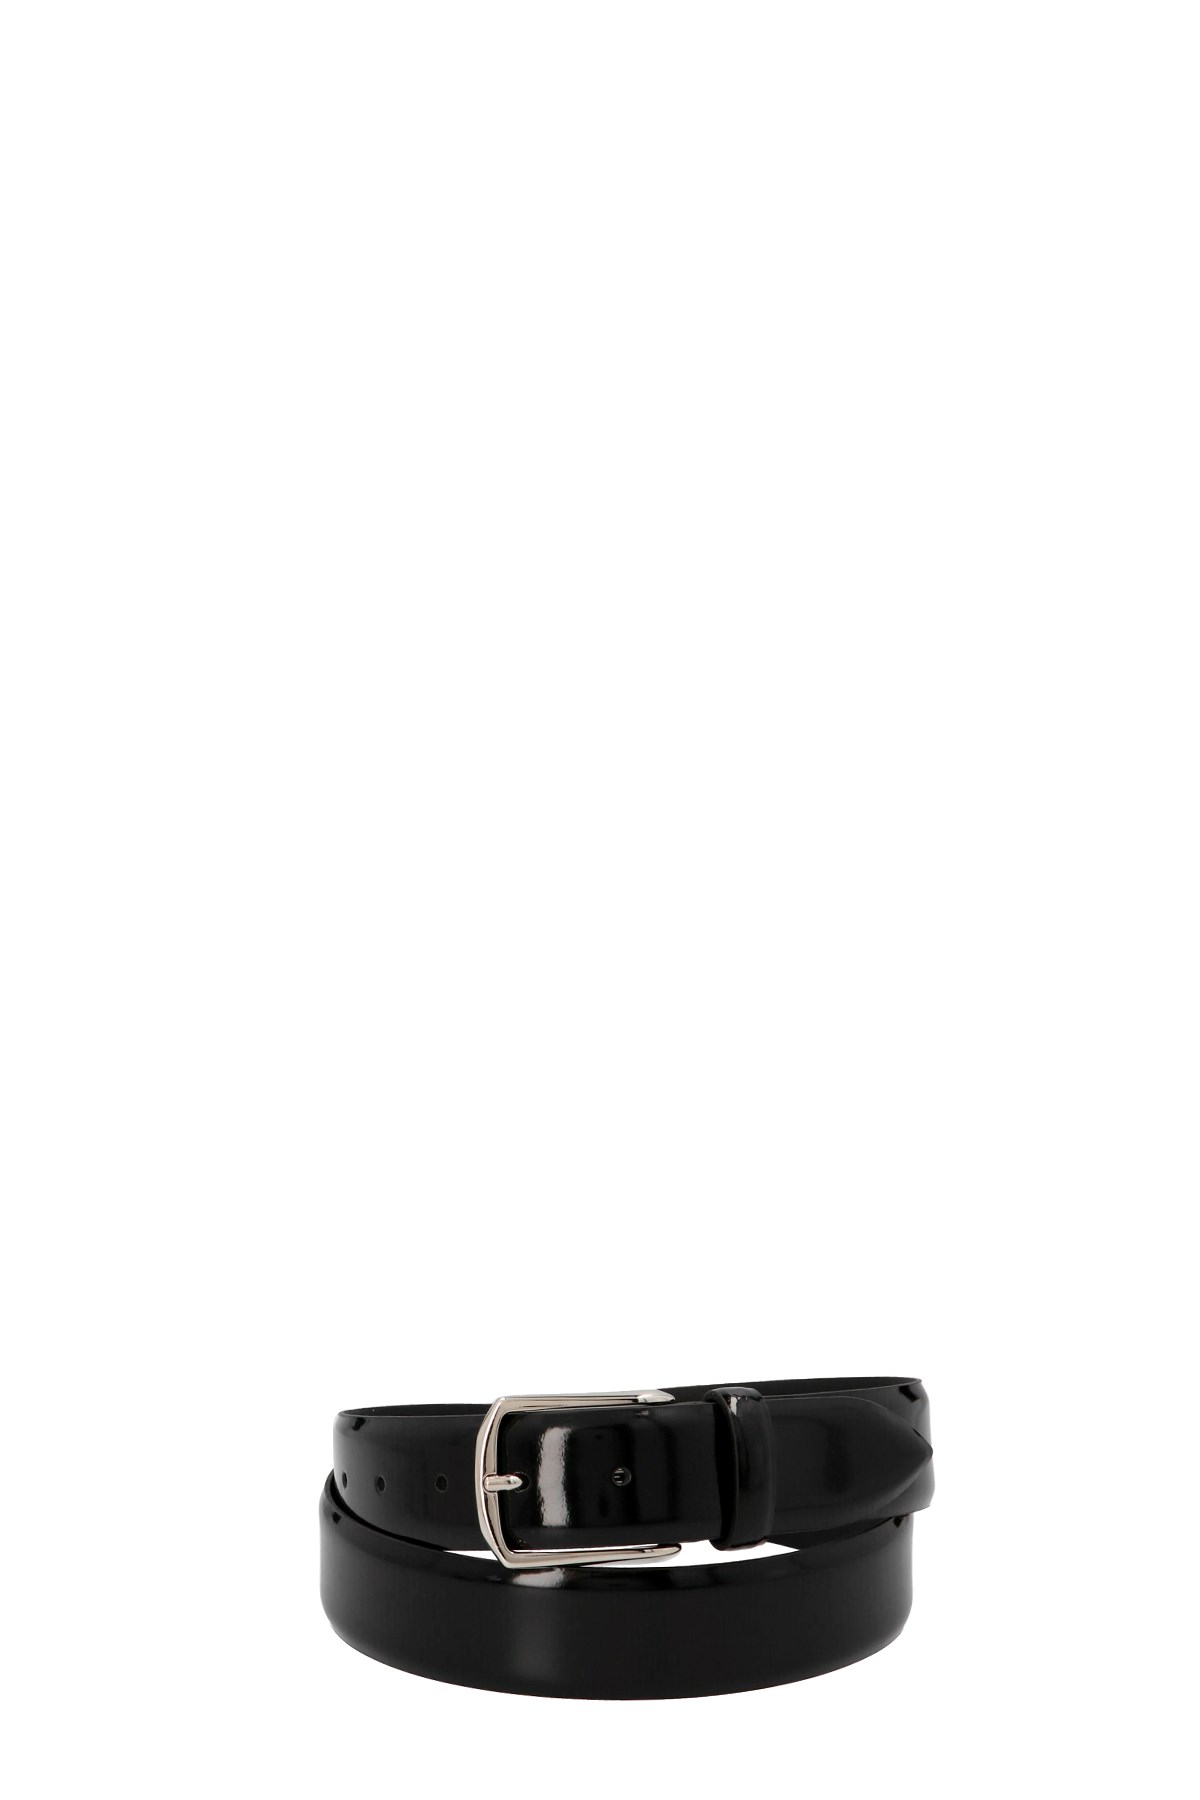 ANDREA D'AMICO Polished Leather Belt